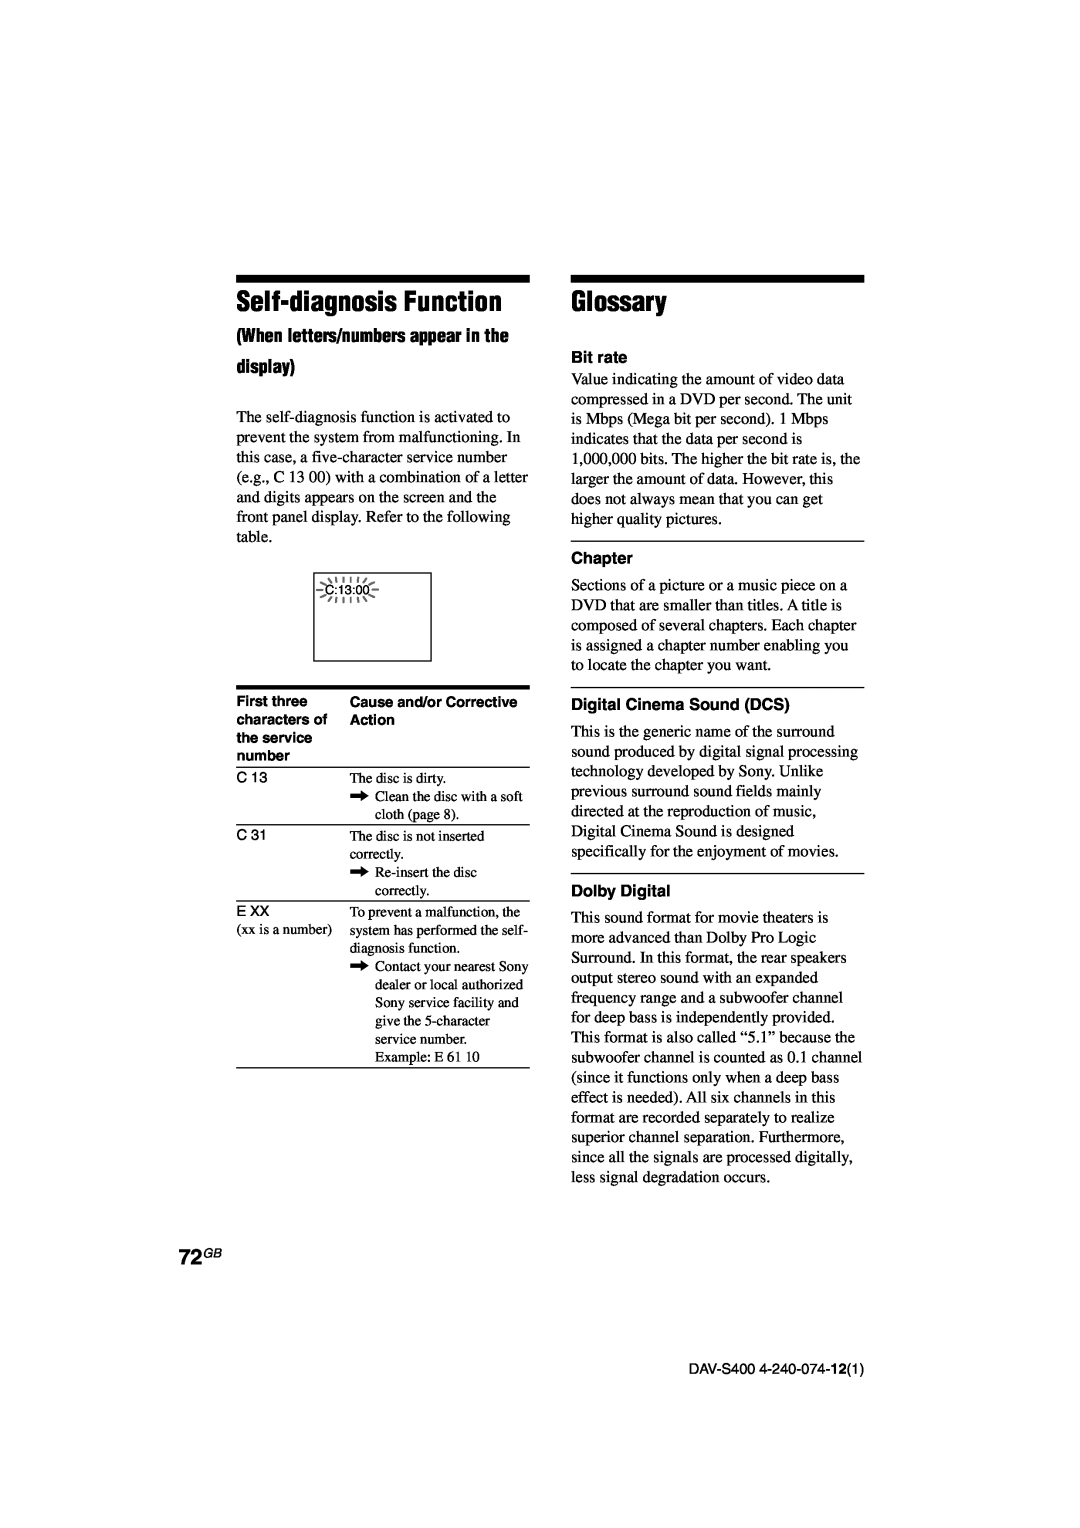 Sony DAV-S400 manual Self-diagnosisFunction, Glossary, 72GB, When letters/numbers appear in the display, Bit rate, Chapter 